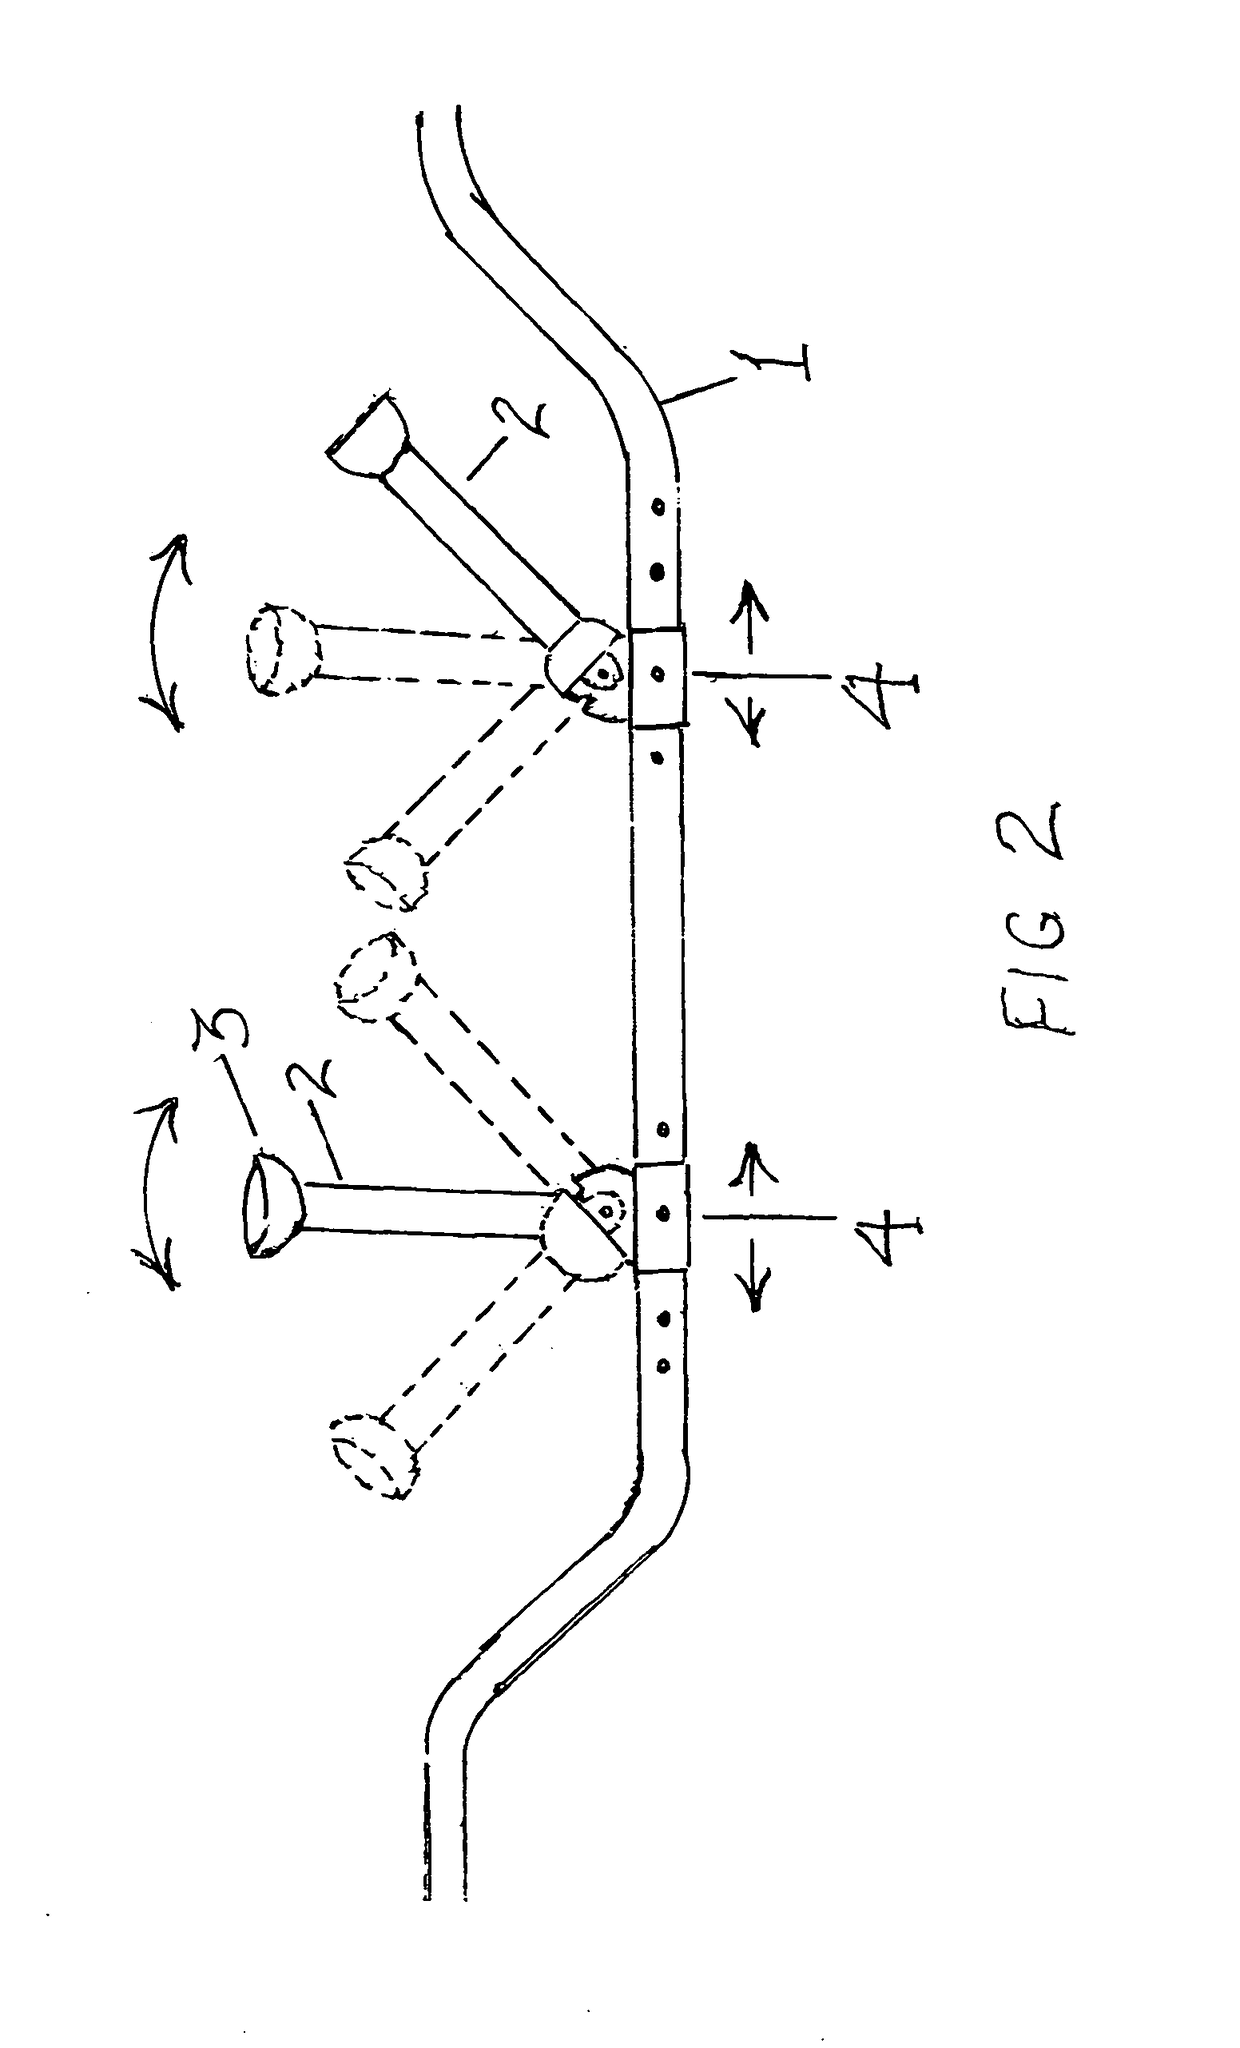 Hand-held adjustable exercise apparatus